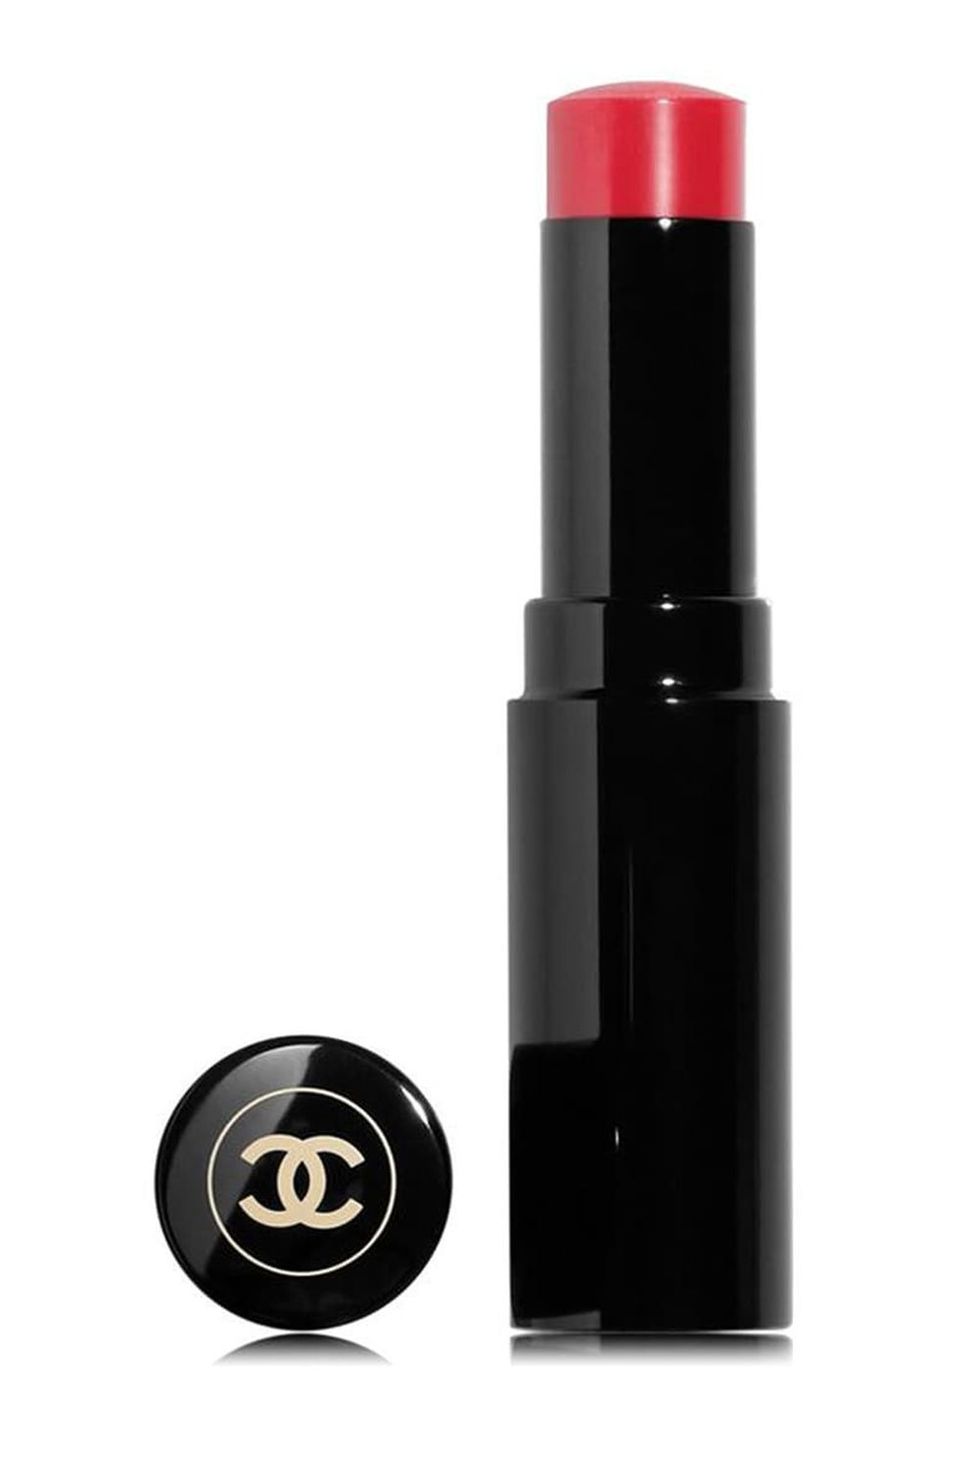 chanel chapstick clear